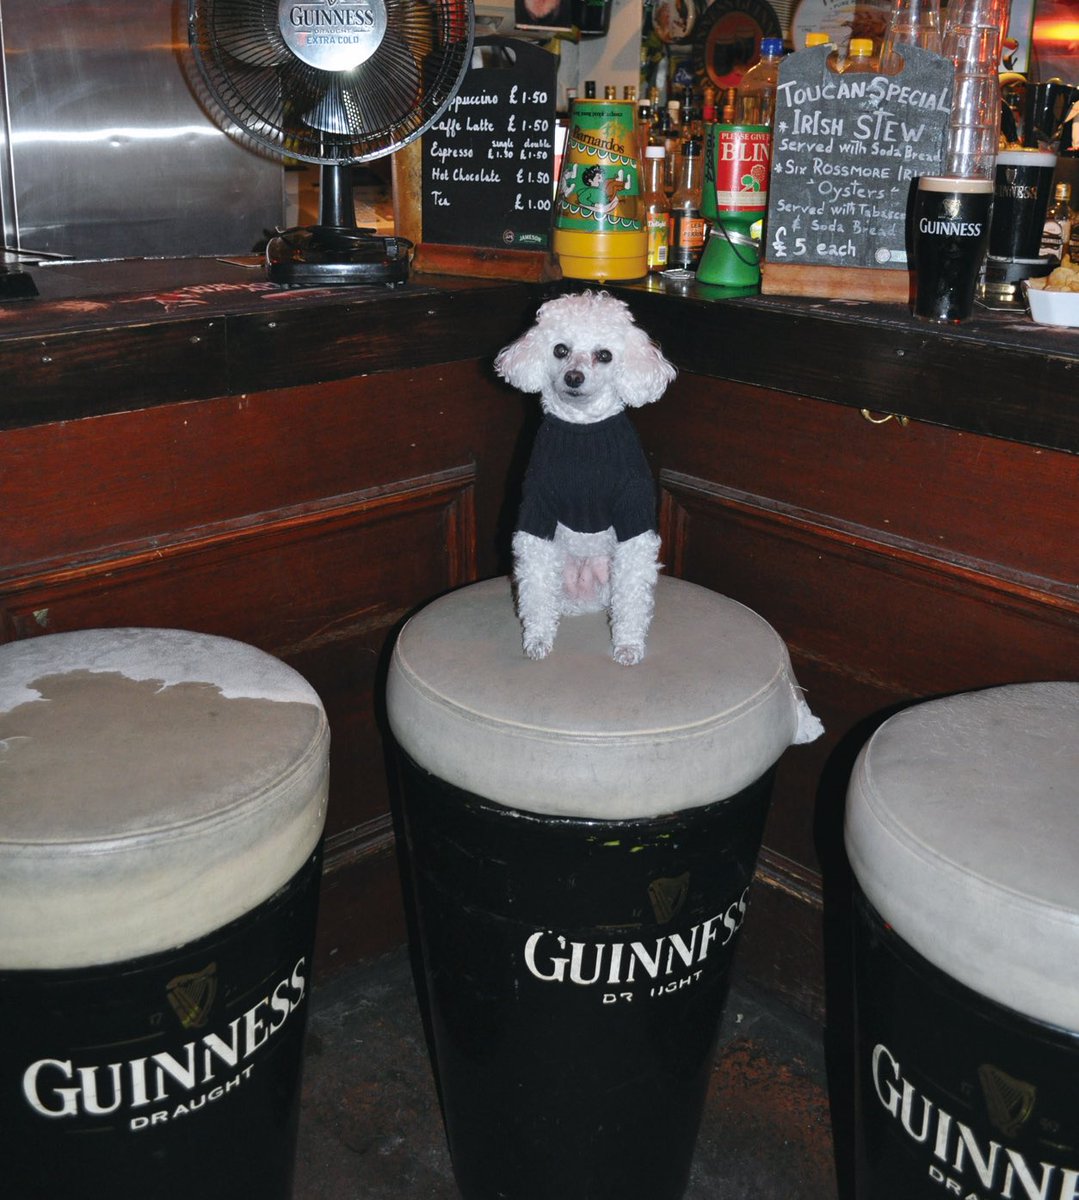 ☘️Happy St Patrick’s Day 💚☘️ We took this photo of Peggy Lee at The Toucan in Soho - one of the best places in London to get a Guinness and an Irish whiskey. Sláinte! @Metropoodle #thetoucan #soho #london #stpatricksday #guinness #happystpatricksday